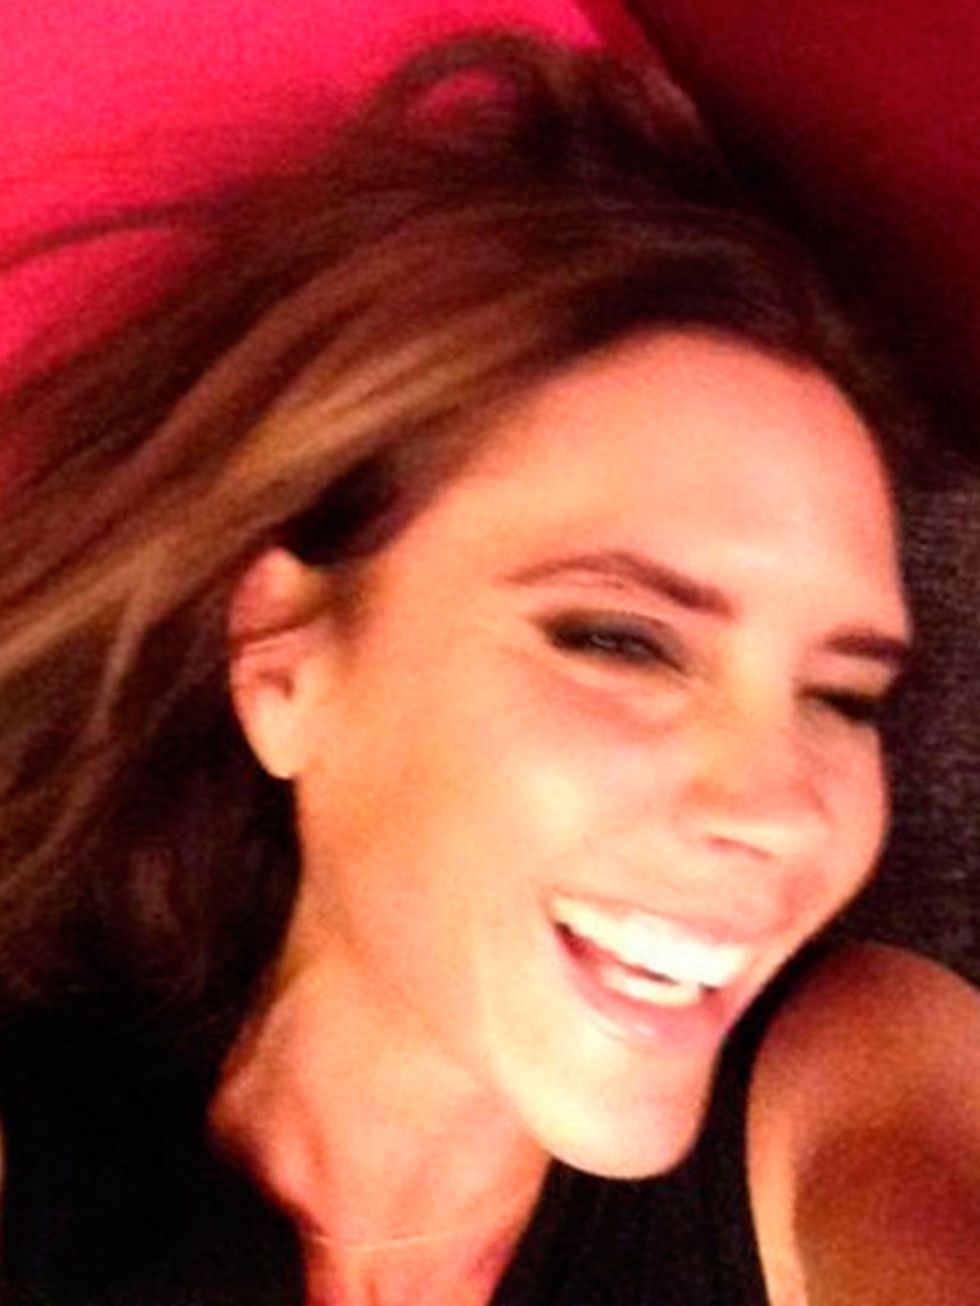 <p>Yes, she does smile. Not only that, but she makes fun of herself when she does it. And publicly.</p><p><em>Victoria Beckham smiles in a 2013 selfie.</em></p><p><a href="http://www.elleuk.com/star-style/celebrity-style-files/victoria-beckham-style"></a>